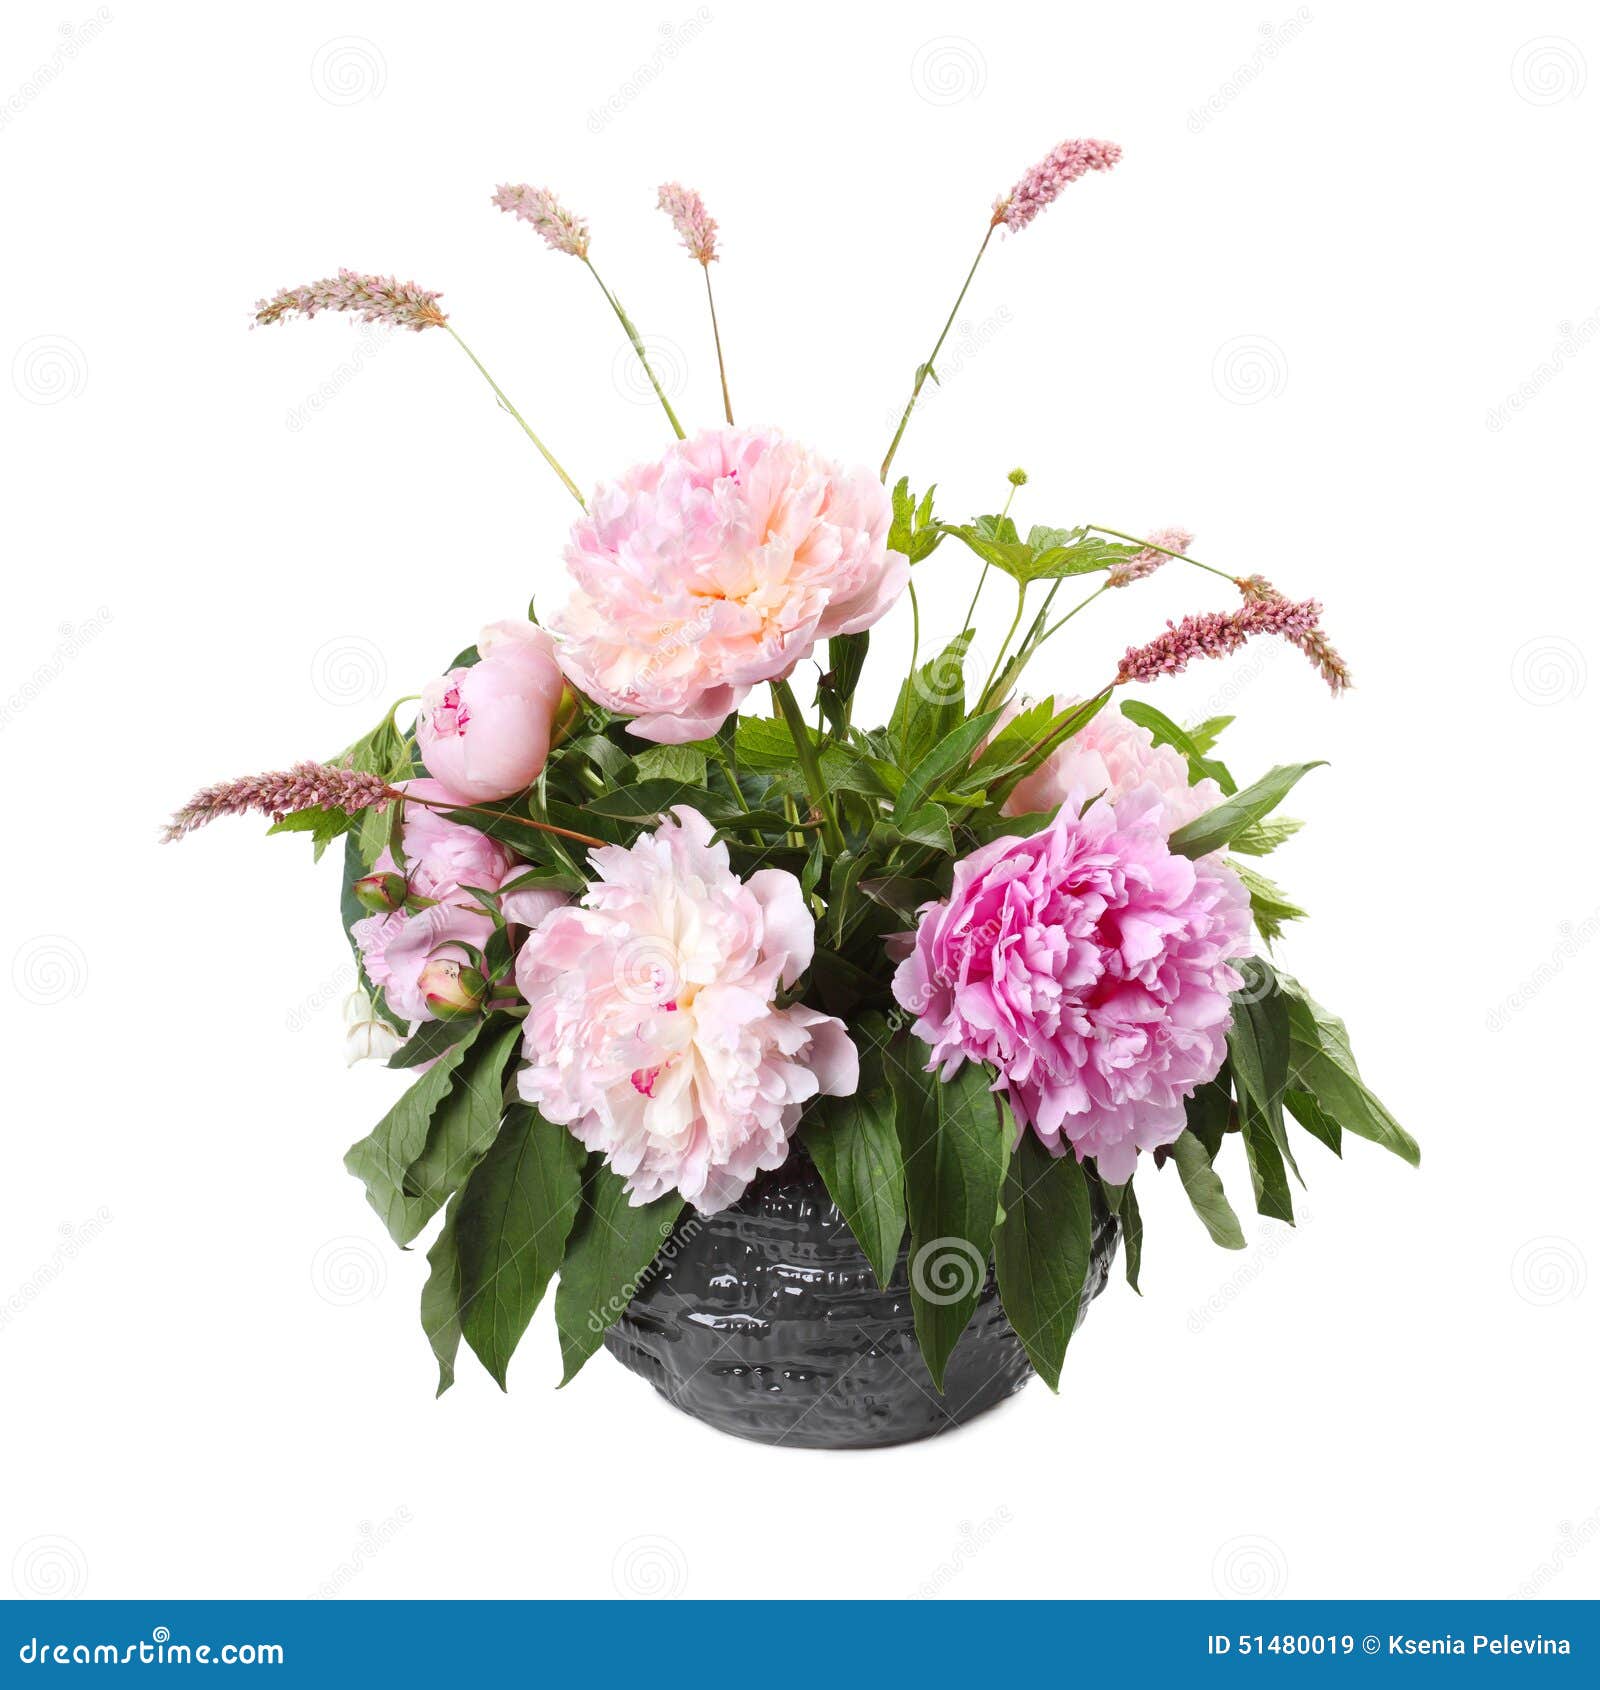 bouquet of pink peonies and sorrel in a vase